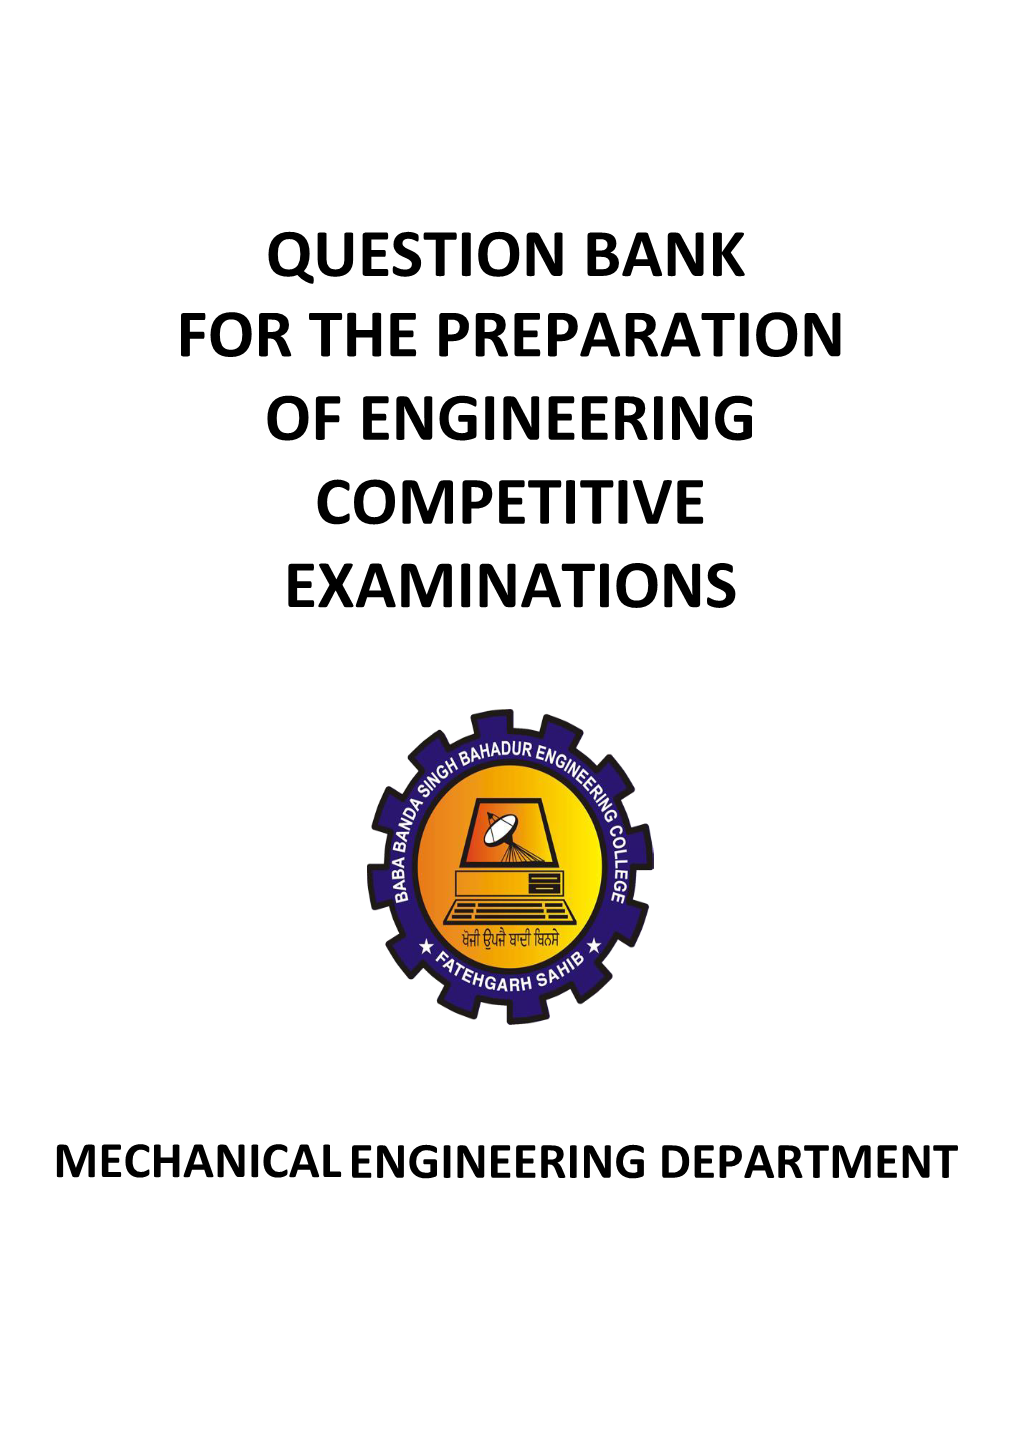 Question Bank for the Preparation of Engineering Competitive Examinations